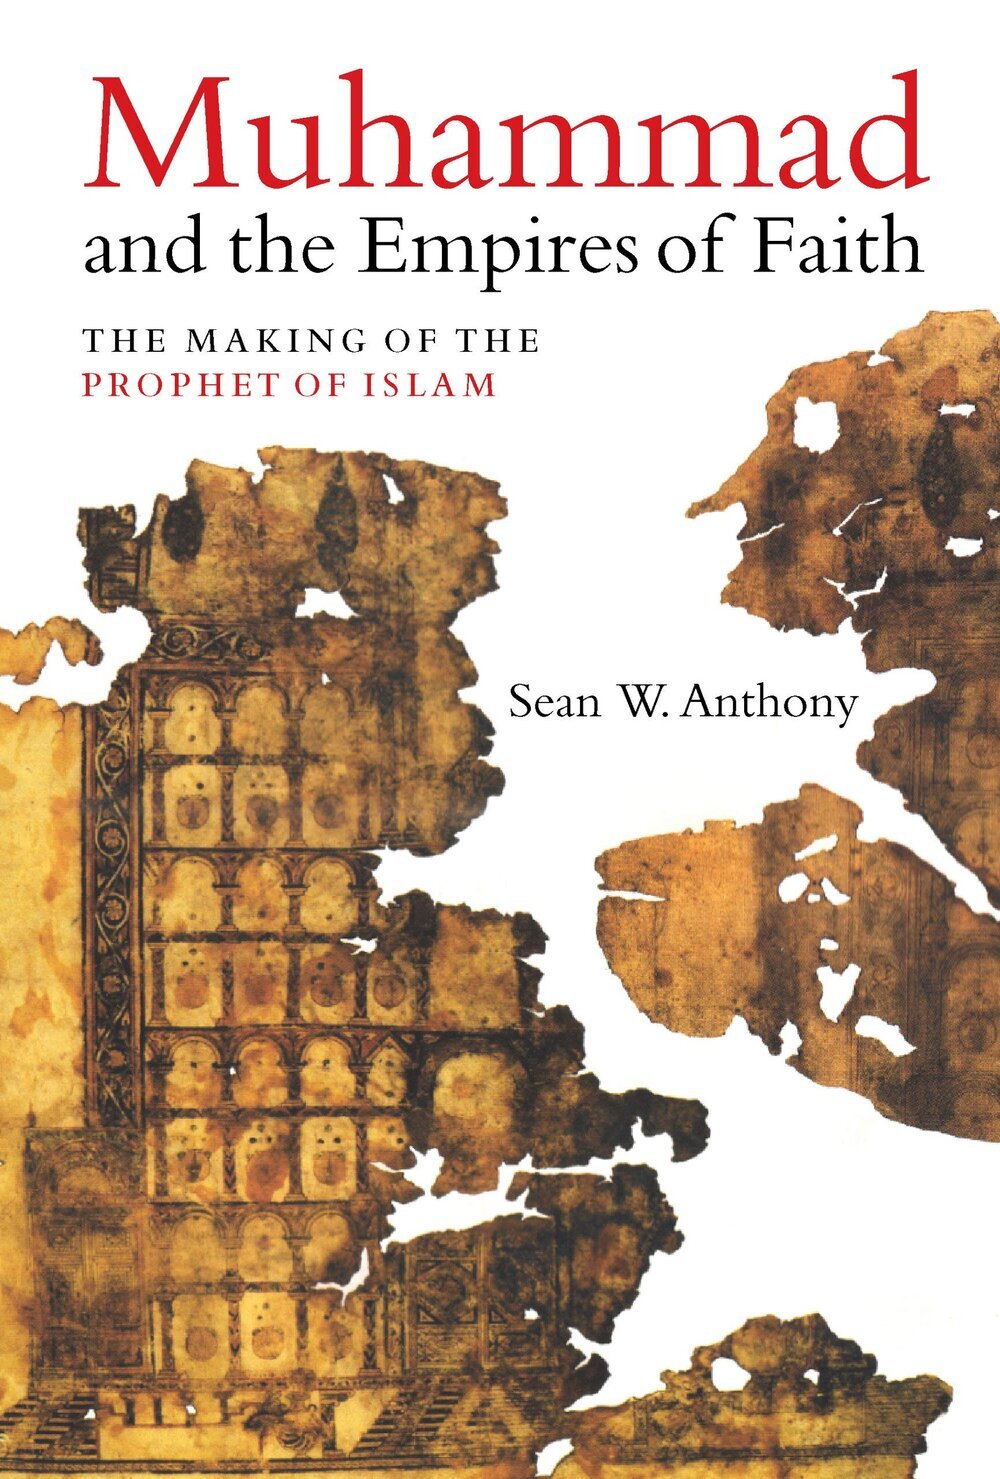 Best of History Muhammad and the Empires of Faith The Making of the Prophet of Islam by Sean W Anthony.jpg